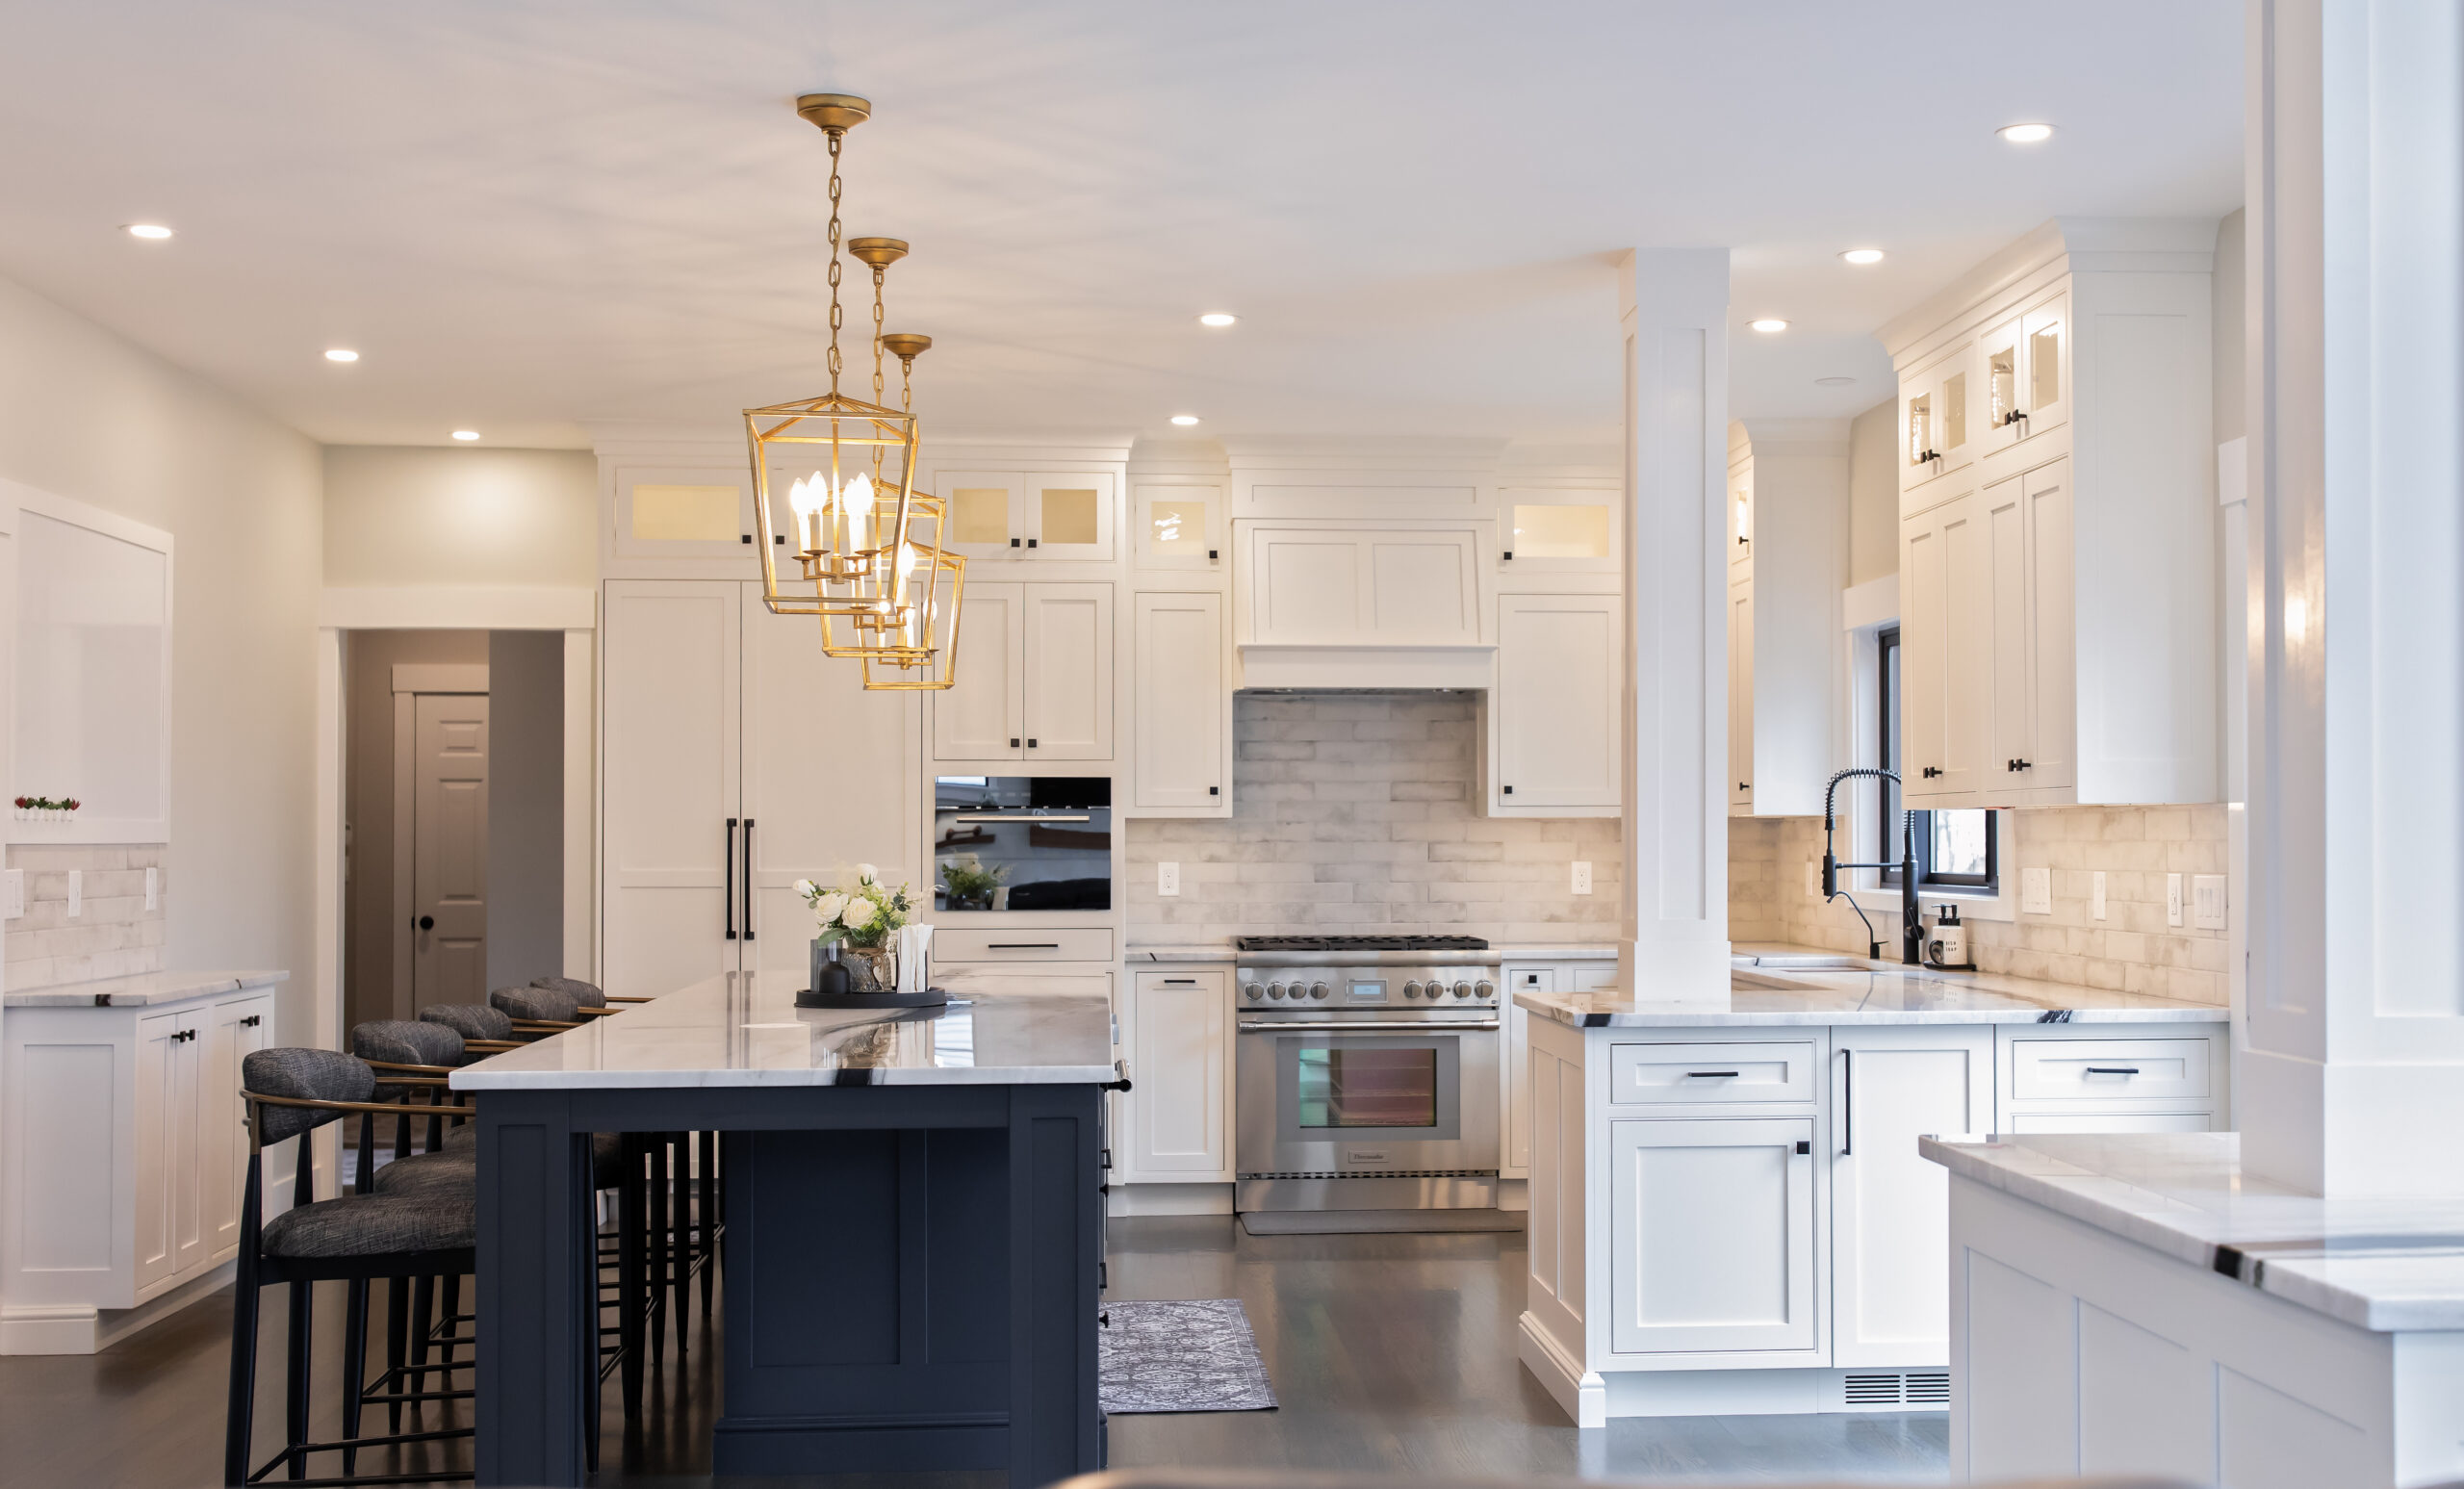 Wide angle photo of a kitchen island, kitchen lighting, kitchen appliances, and interior design performed by Emily's Interiors Kitchen showroom in Shrewsbury Massachusetts